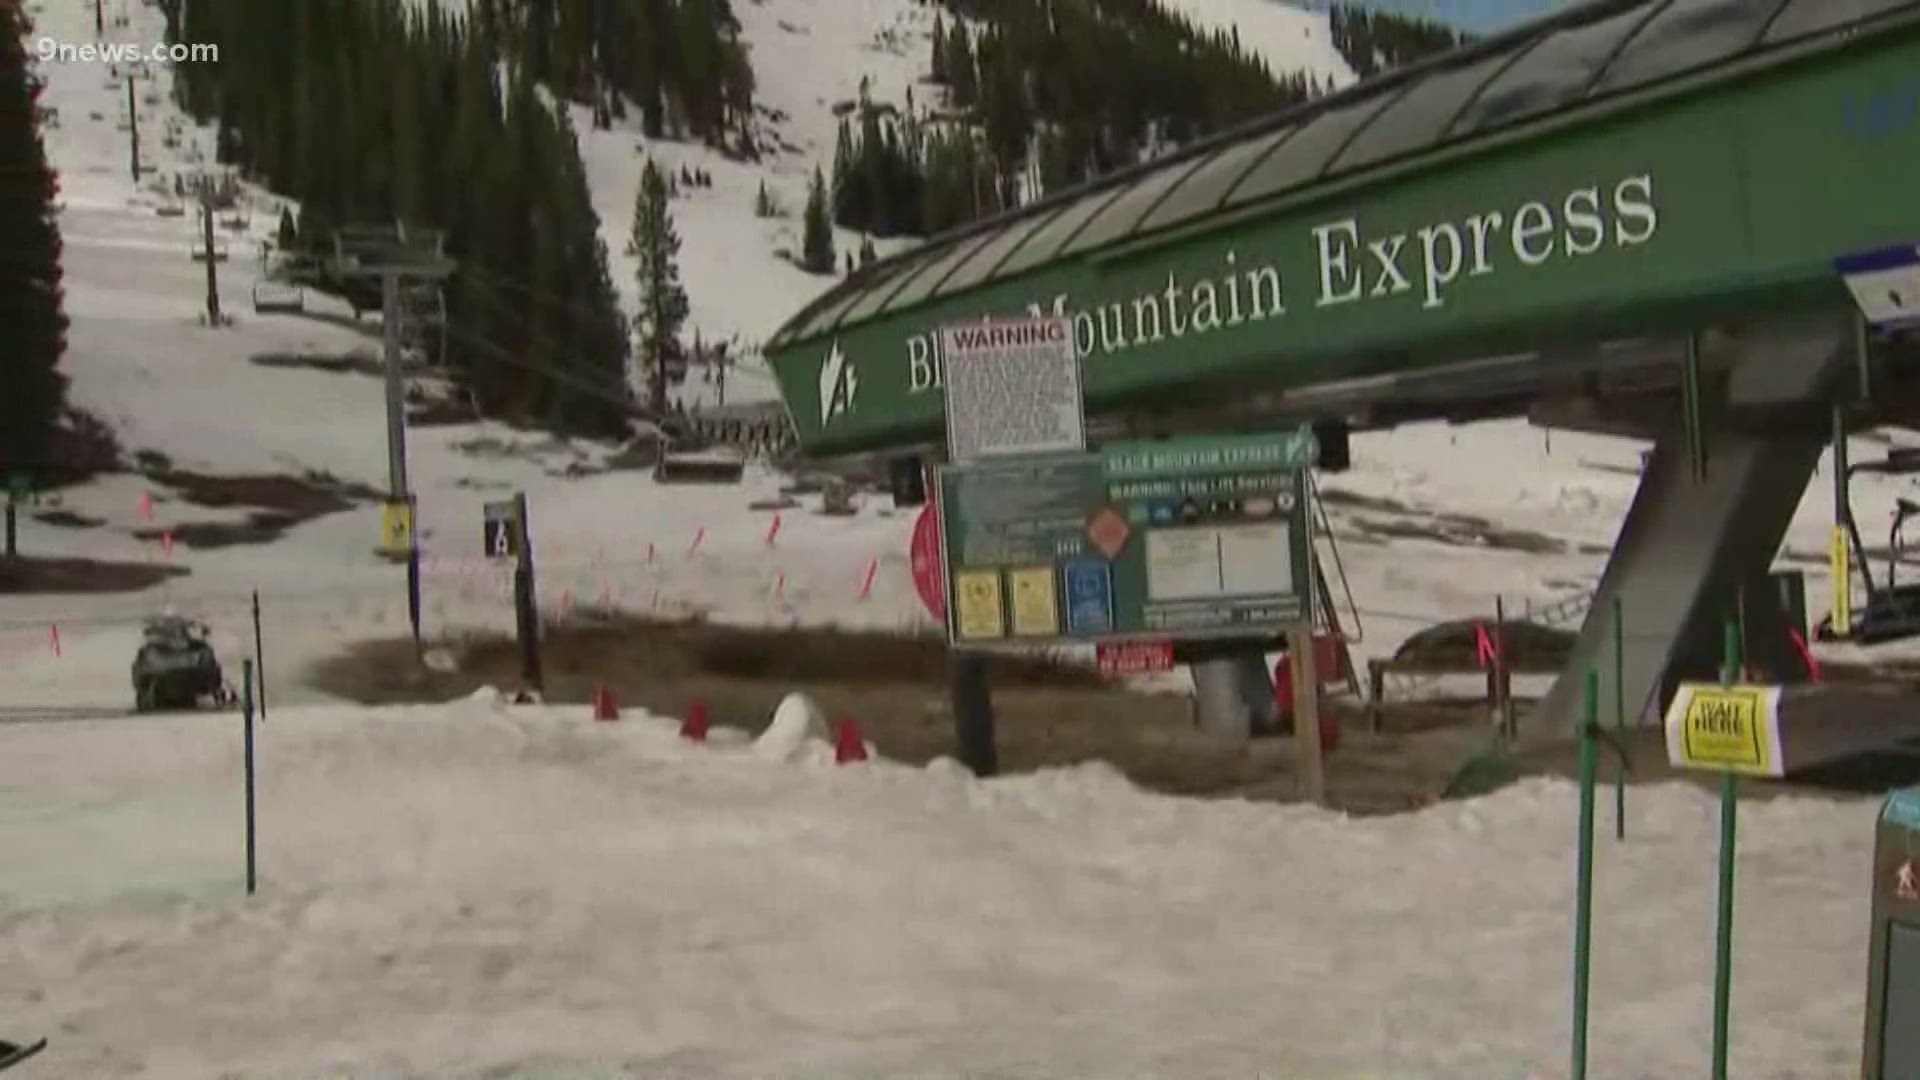 Arapahoe Basin Ski Area reopened on Wednesday after being closed since mid-March.